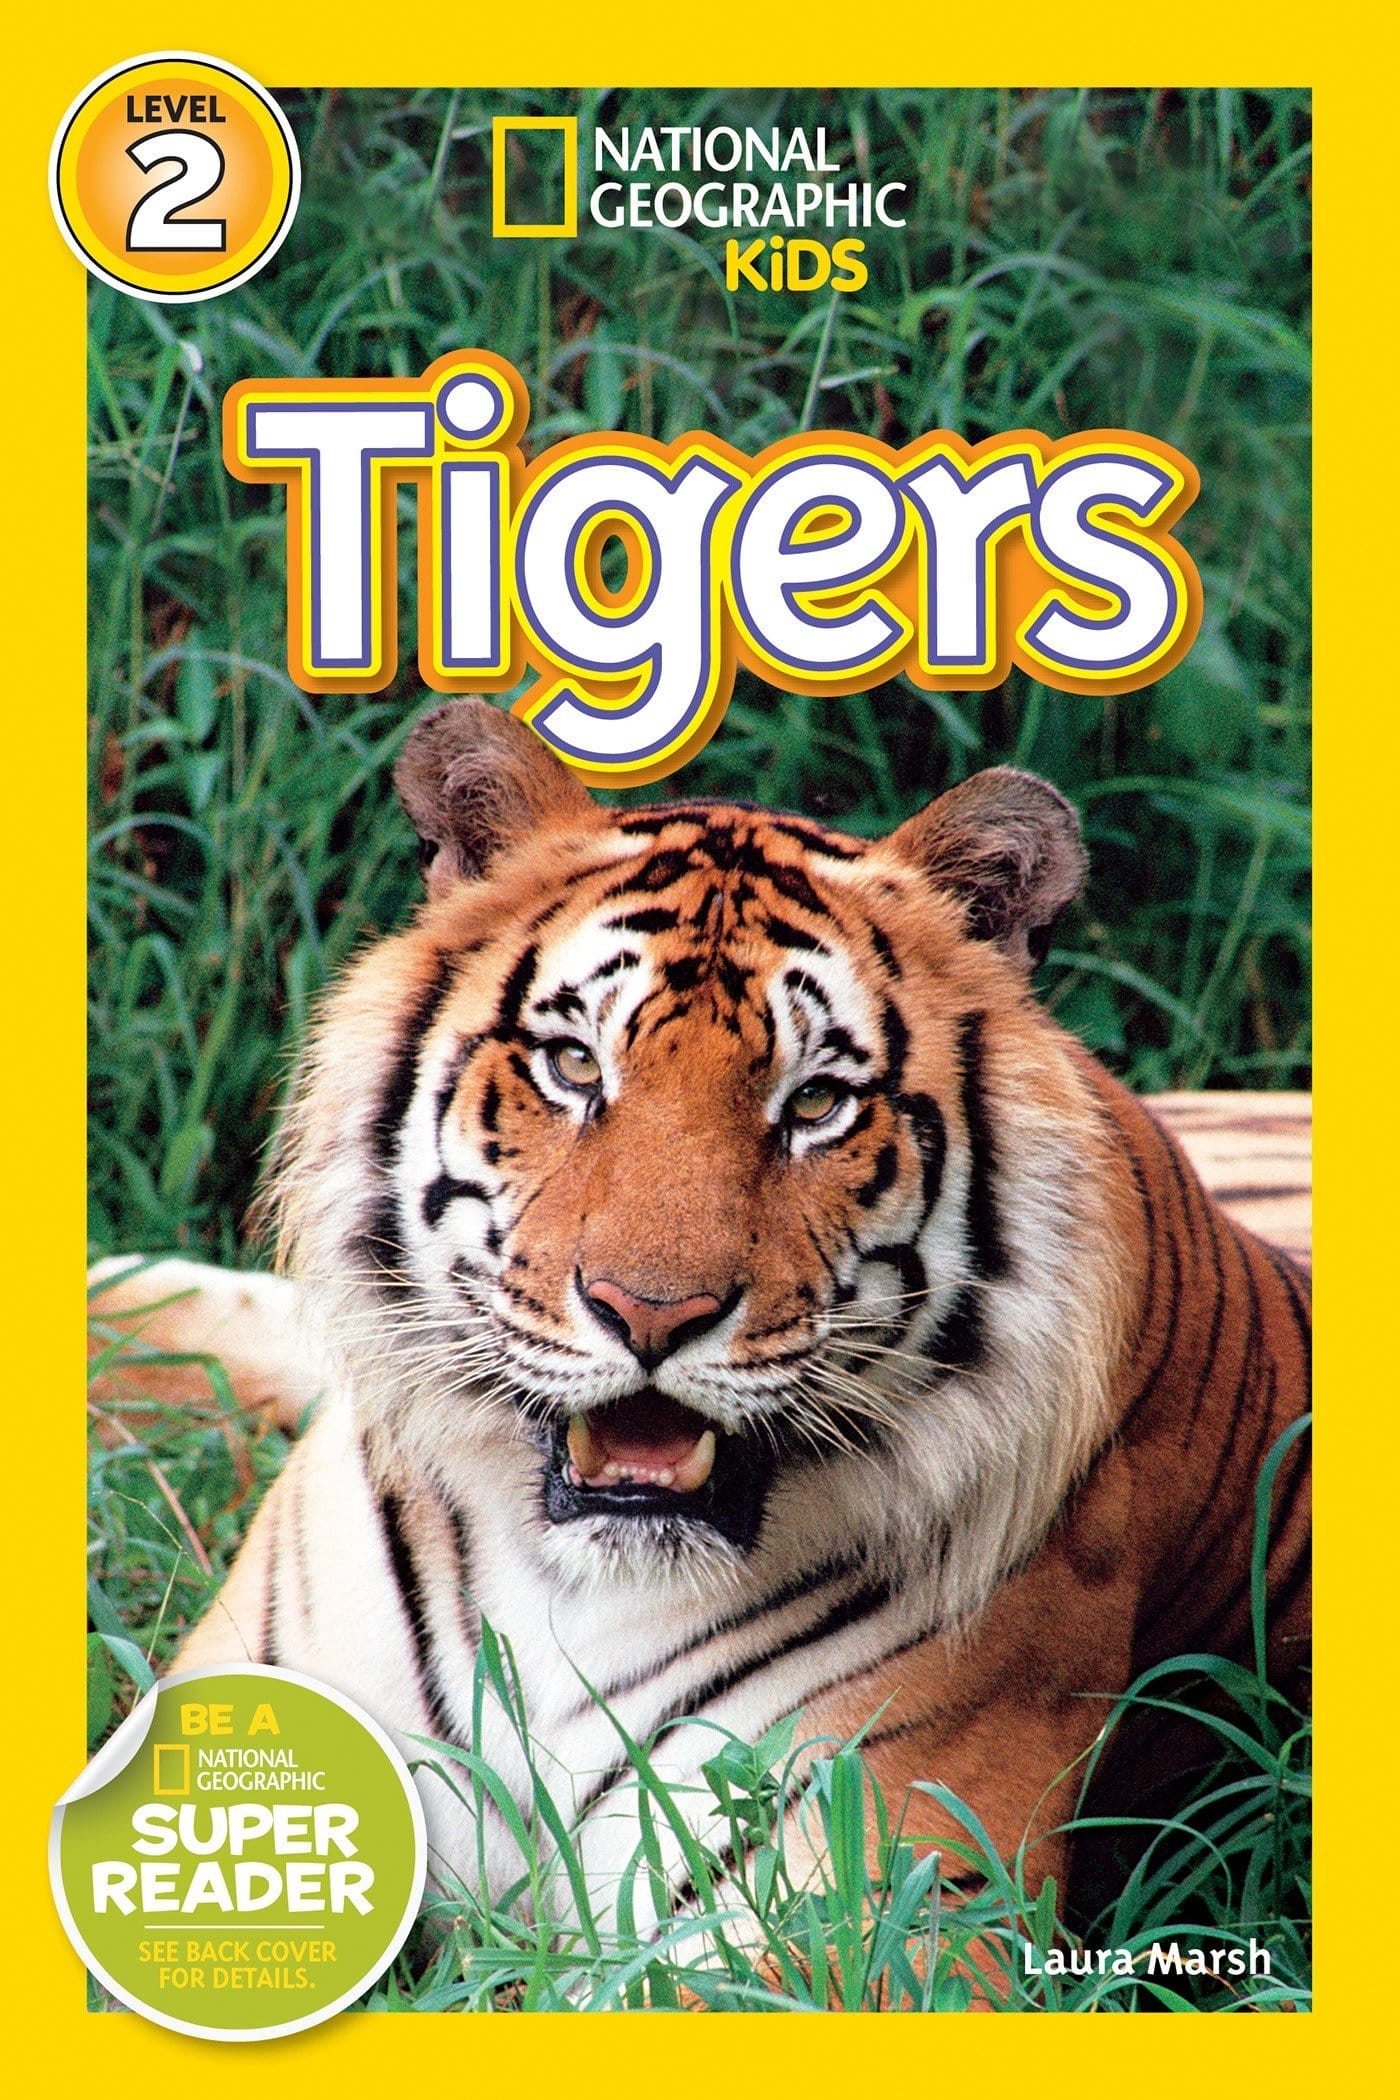 The cover for the book Tigers